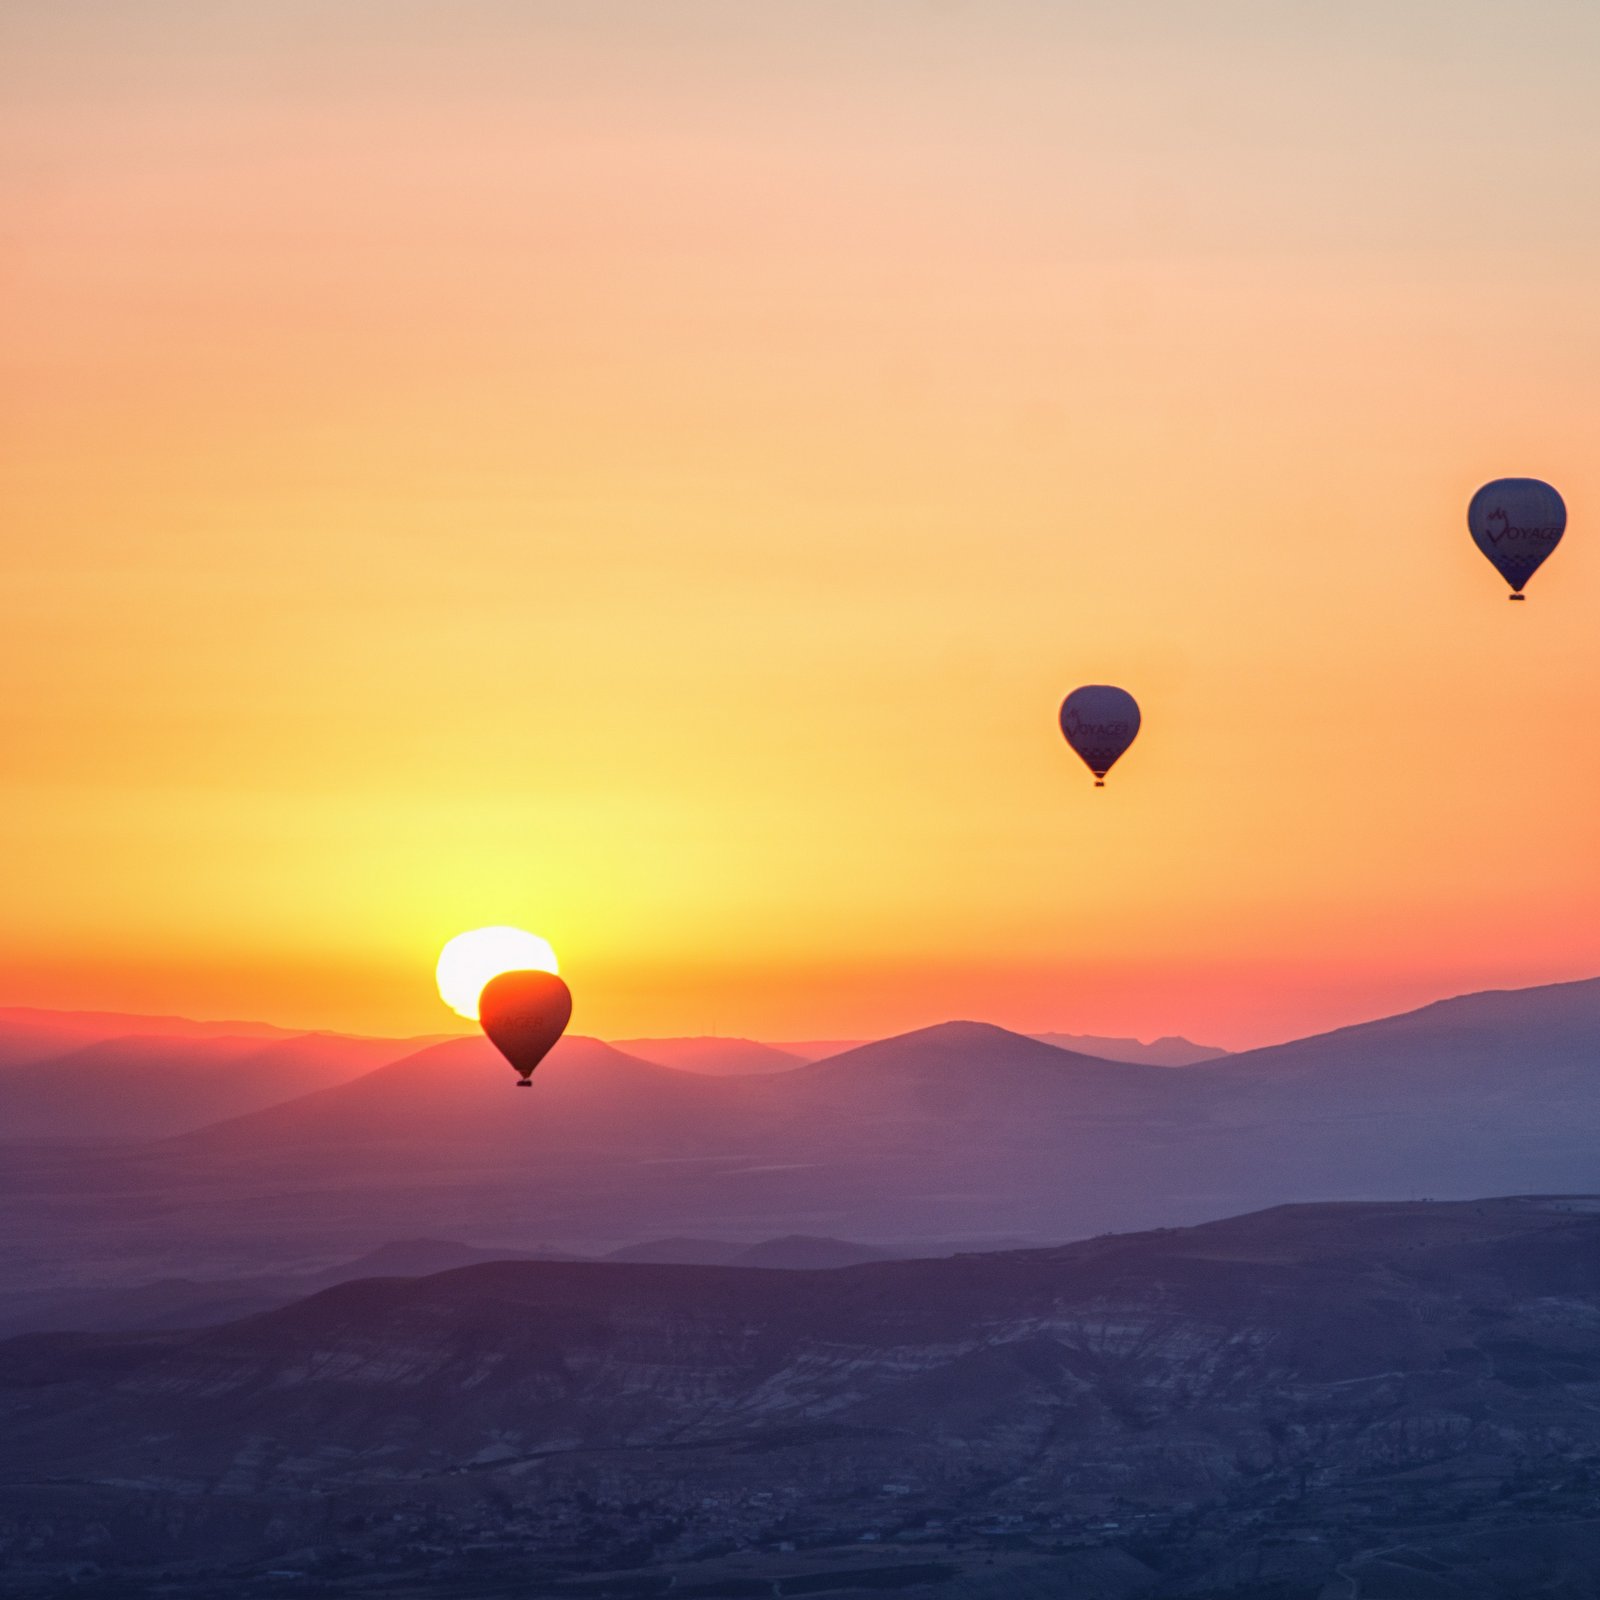 3 hot air balloons rising in the sky